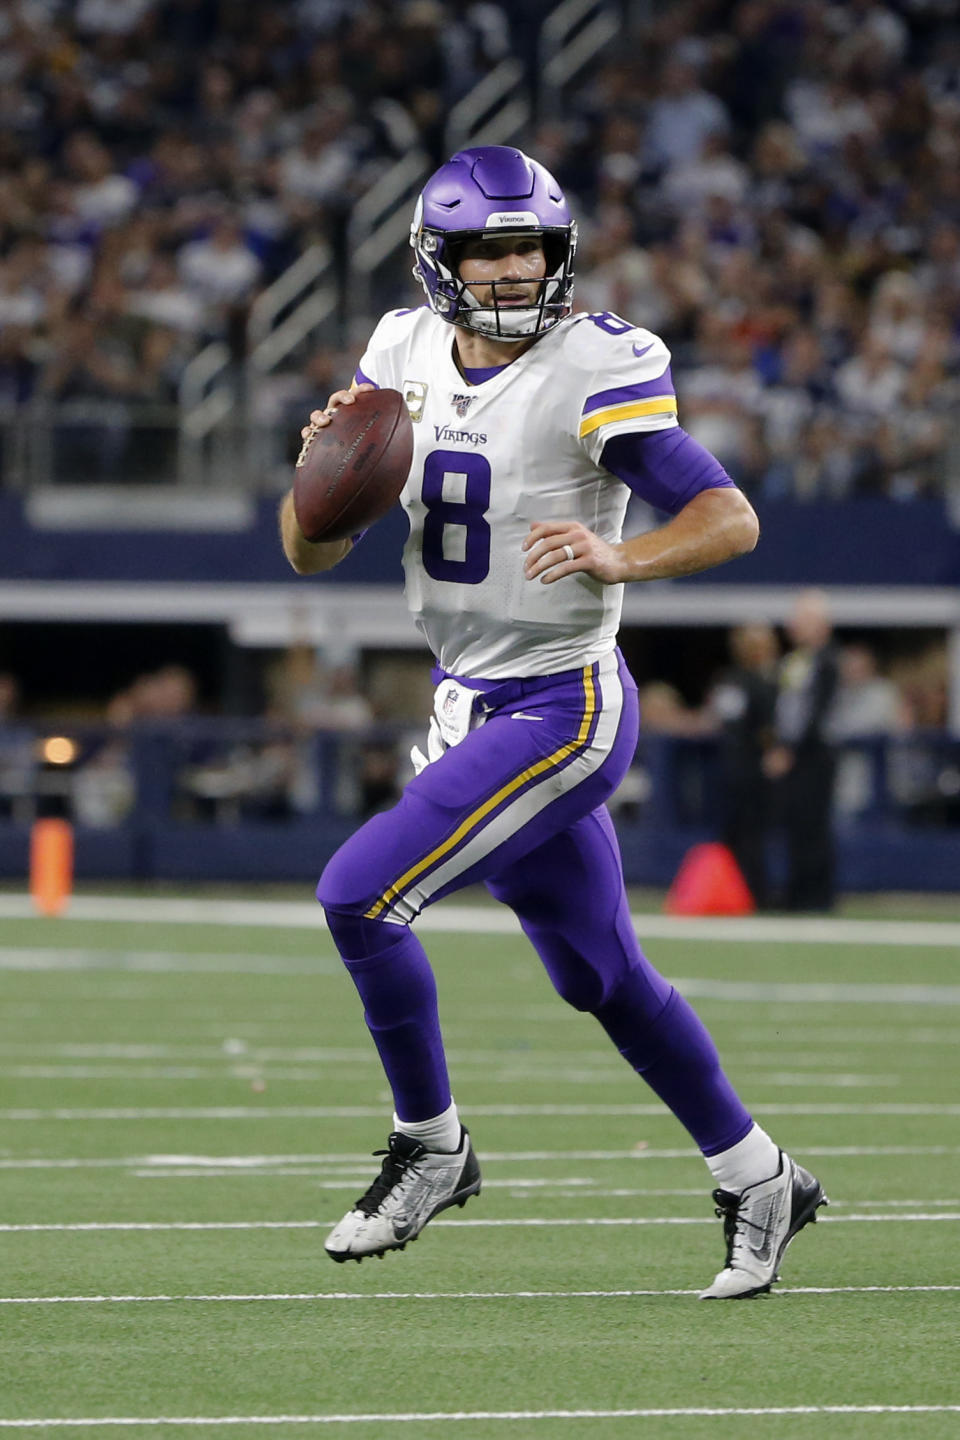 Minnesota Vikings quarterback Kirk Cousins scrambles our of the pocket during the second half of the team's NFL football game against the Dallas Cowboys in Arlington, Texas, Sunday, Nov. 10, 2019. (AP Photo/Michael Ainsworth)